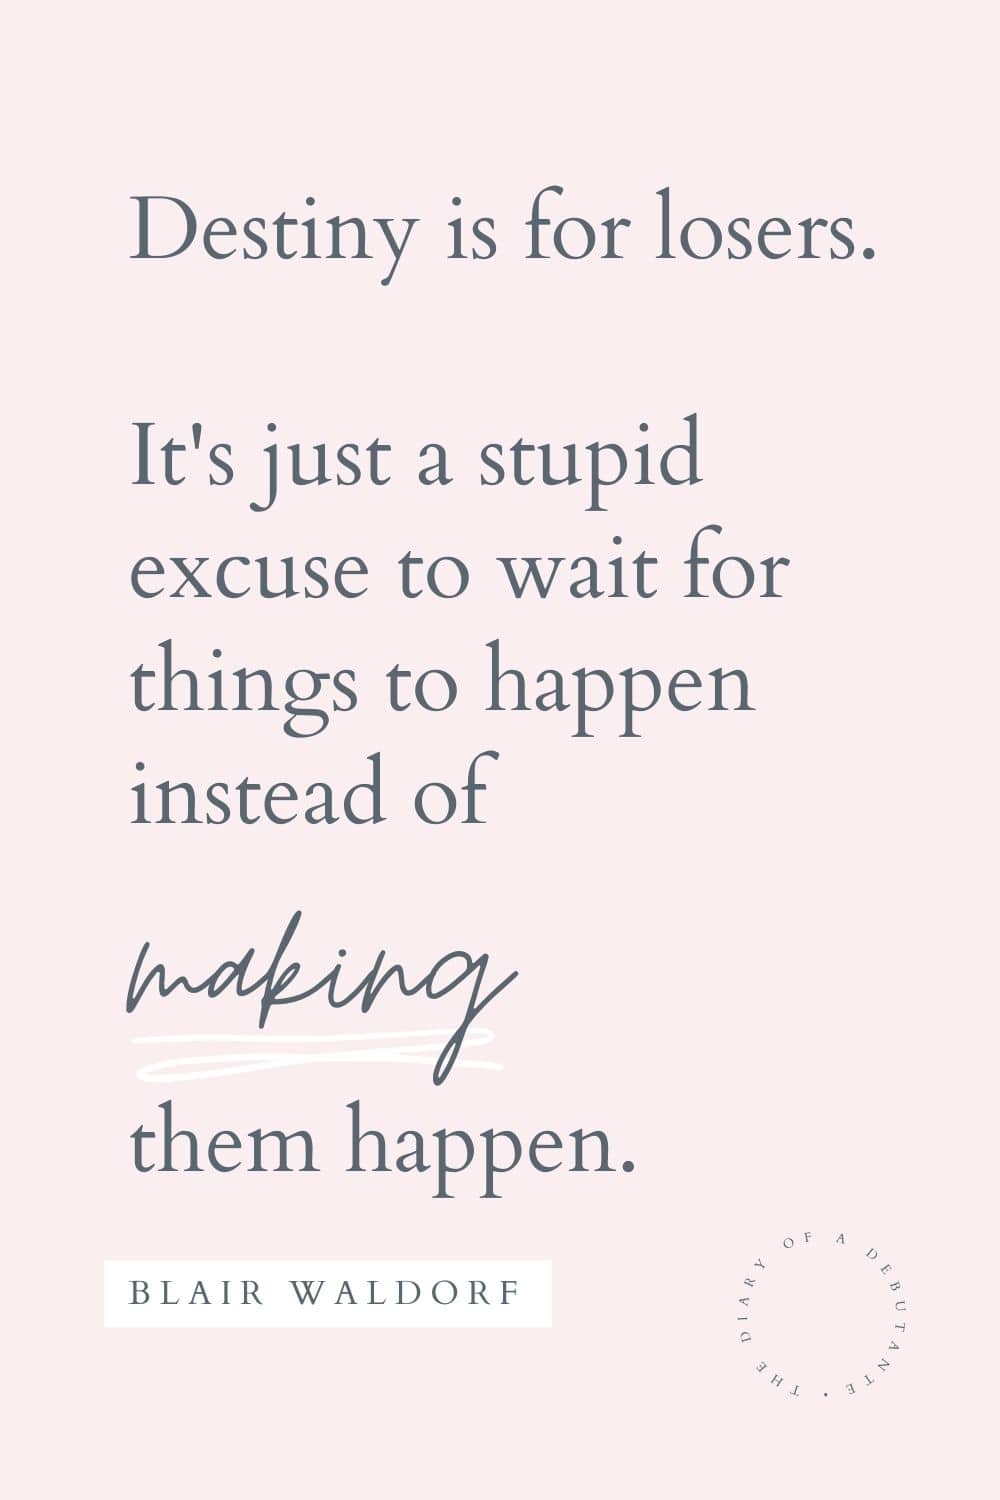 Blair Waldorf destiny is for losers quote curated by blogger Stephanie Ziajka for Women's History Month on Diary of a Debutante